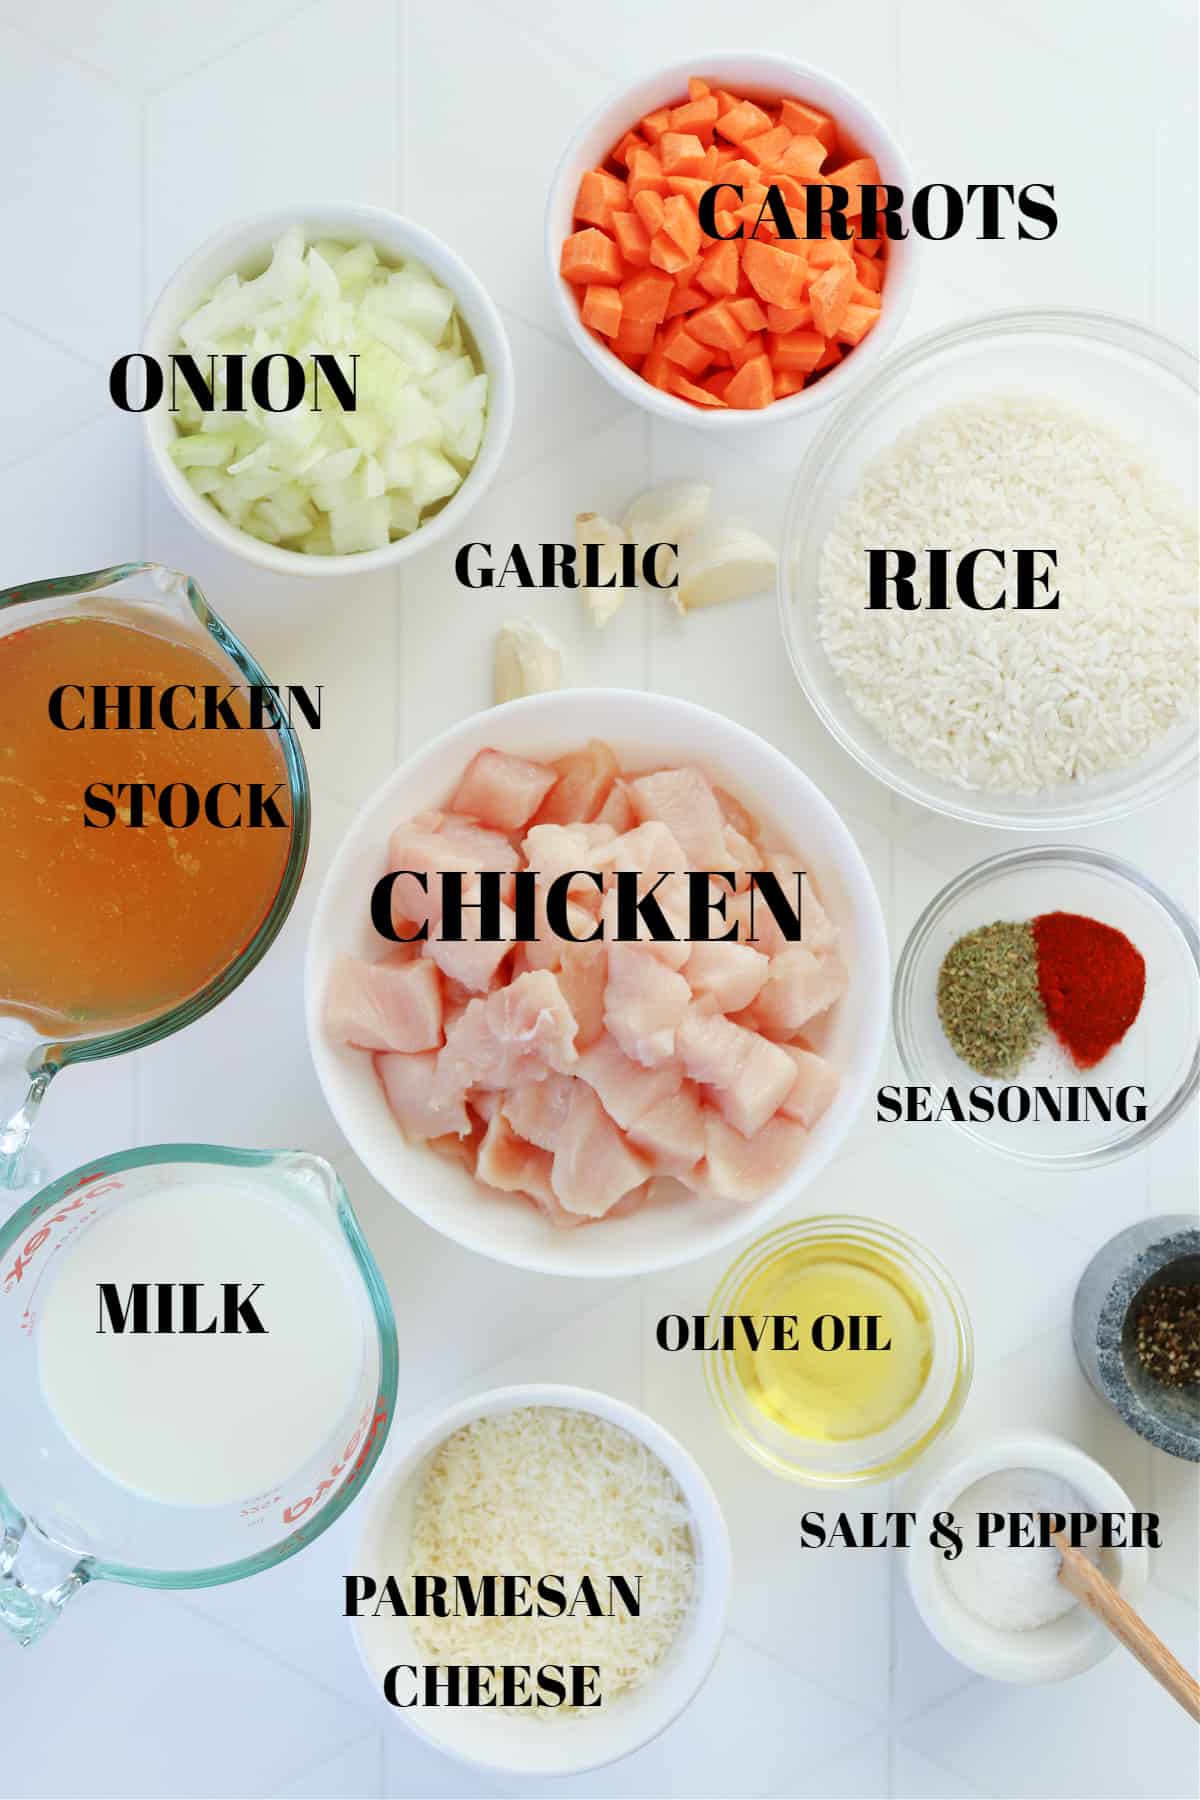 All ingredients for chicken and rice dish in bowls on a white tile board.